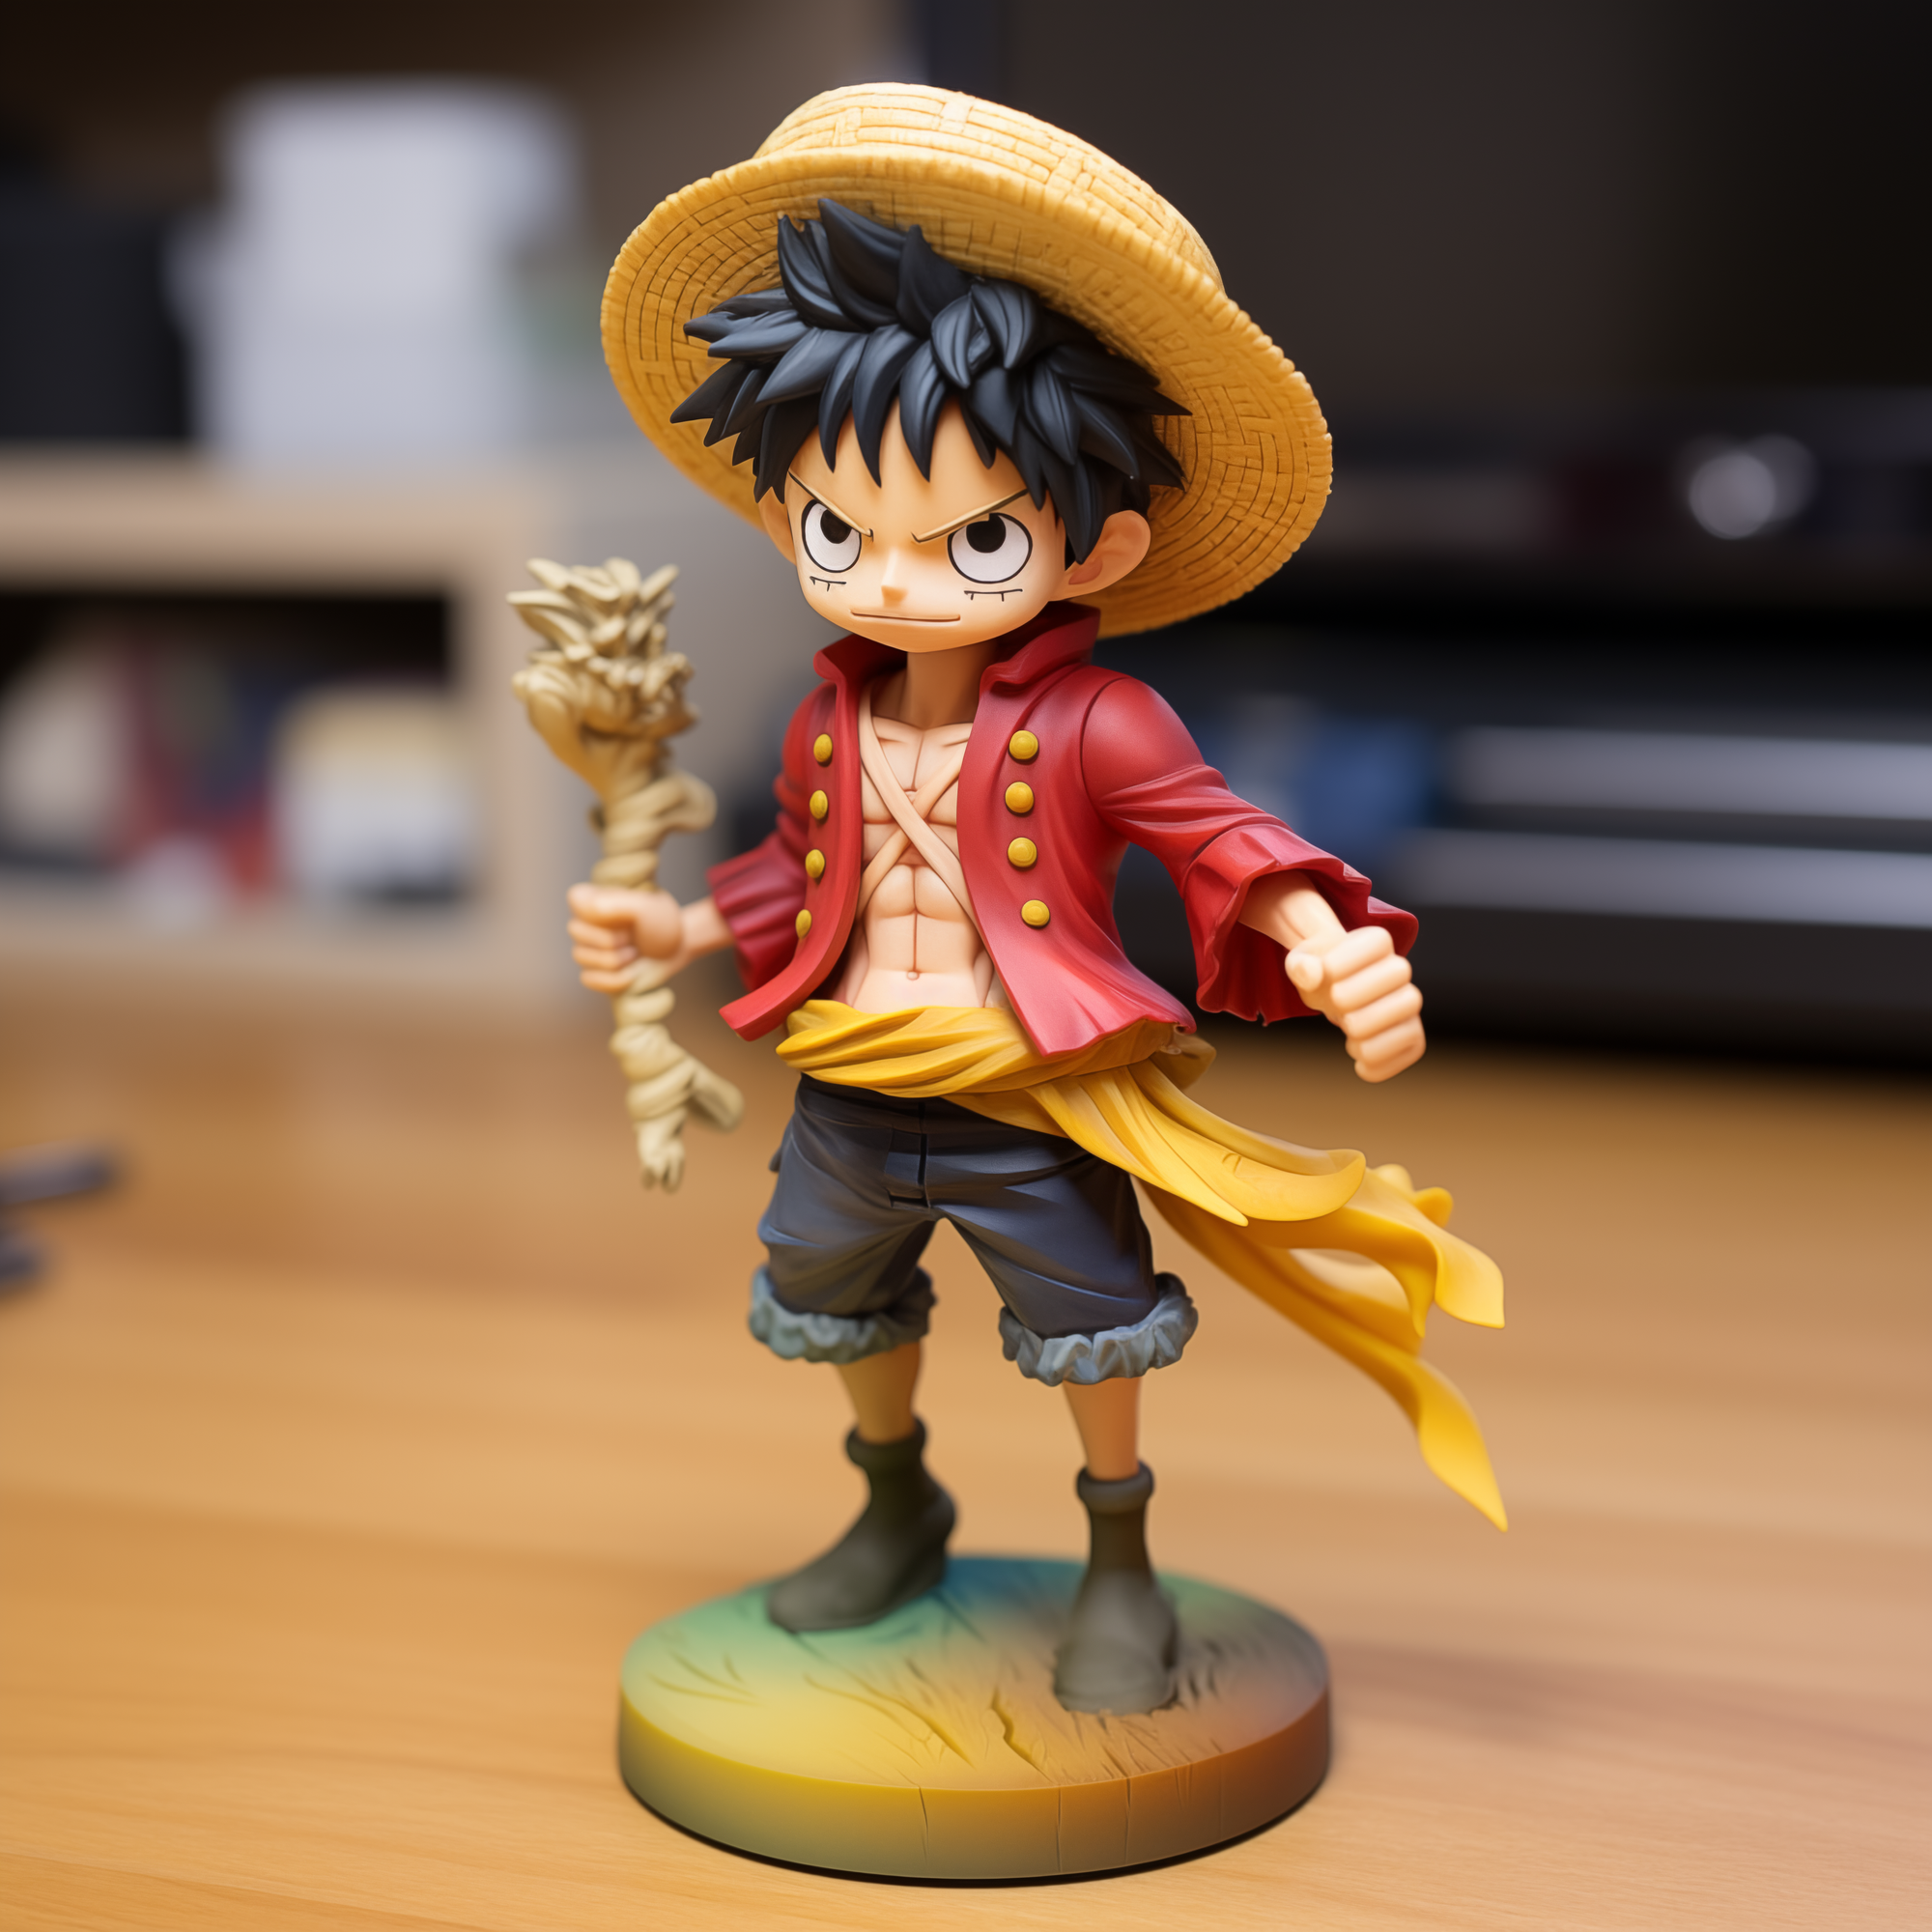 Top Five 3D Prints Inspired by the Anime One Piece: A Must-See for Fans